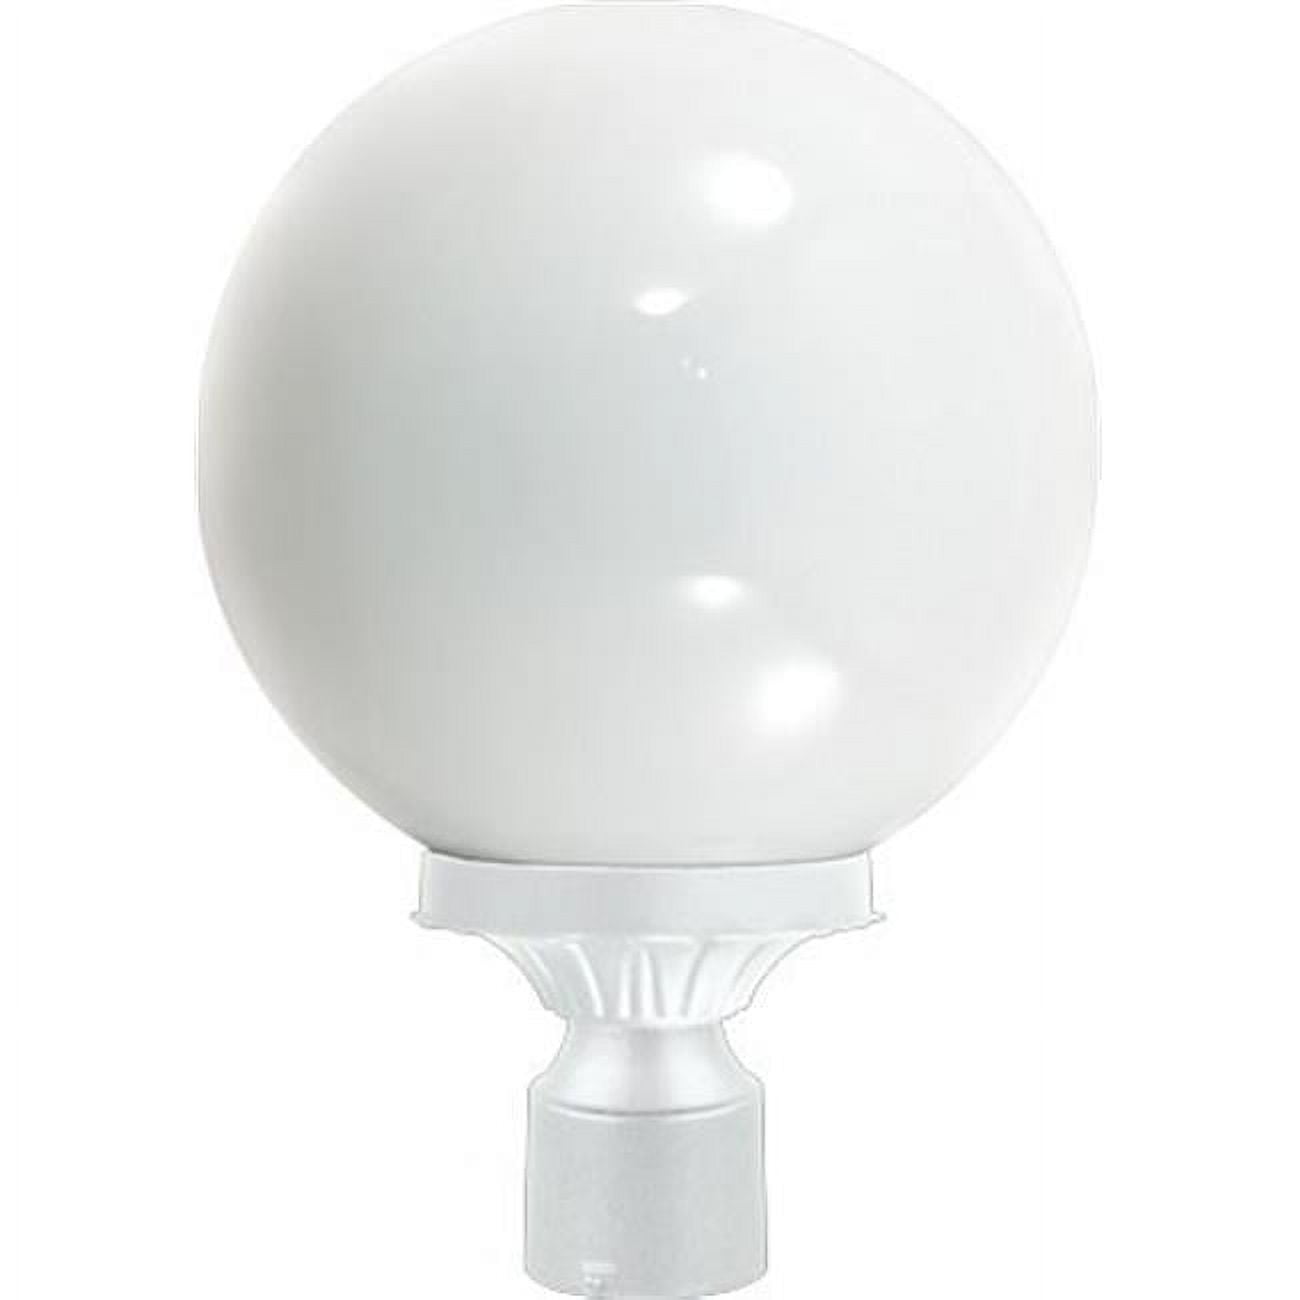 Picture of Dabmar Lighting GM241-W Emily Post Top Fixture - 13W DL-S13-GU24 120V, White